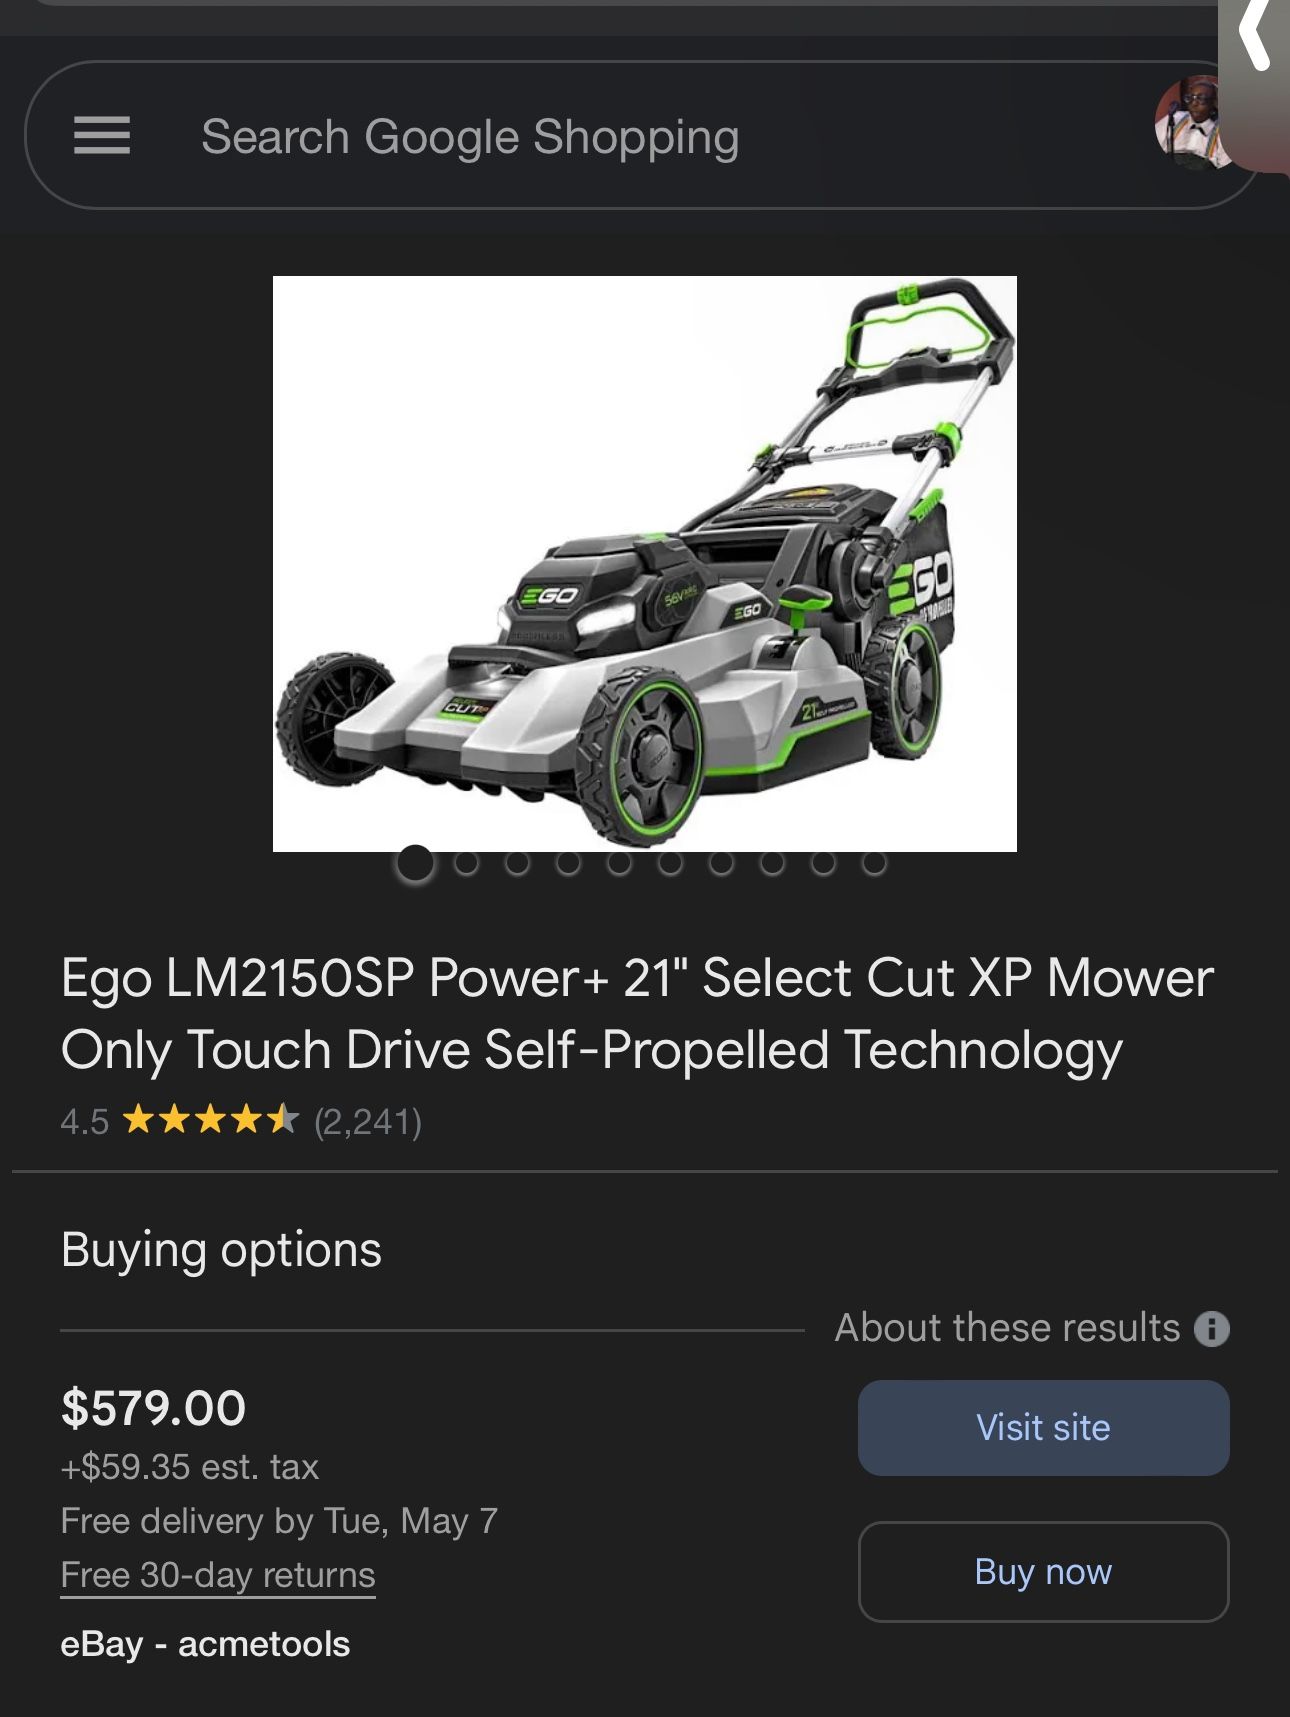 Ego LM2150SP Power+ 21" Select Cut XP Mower 